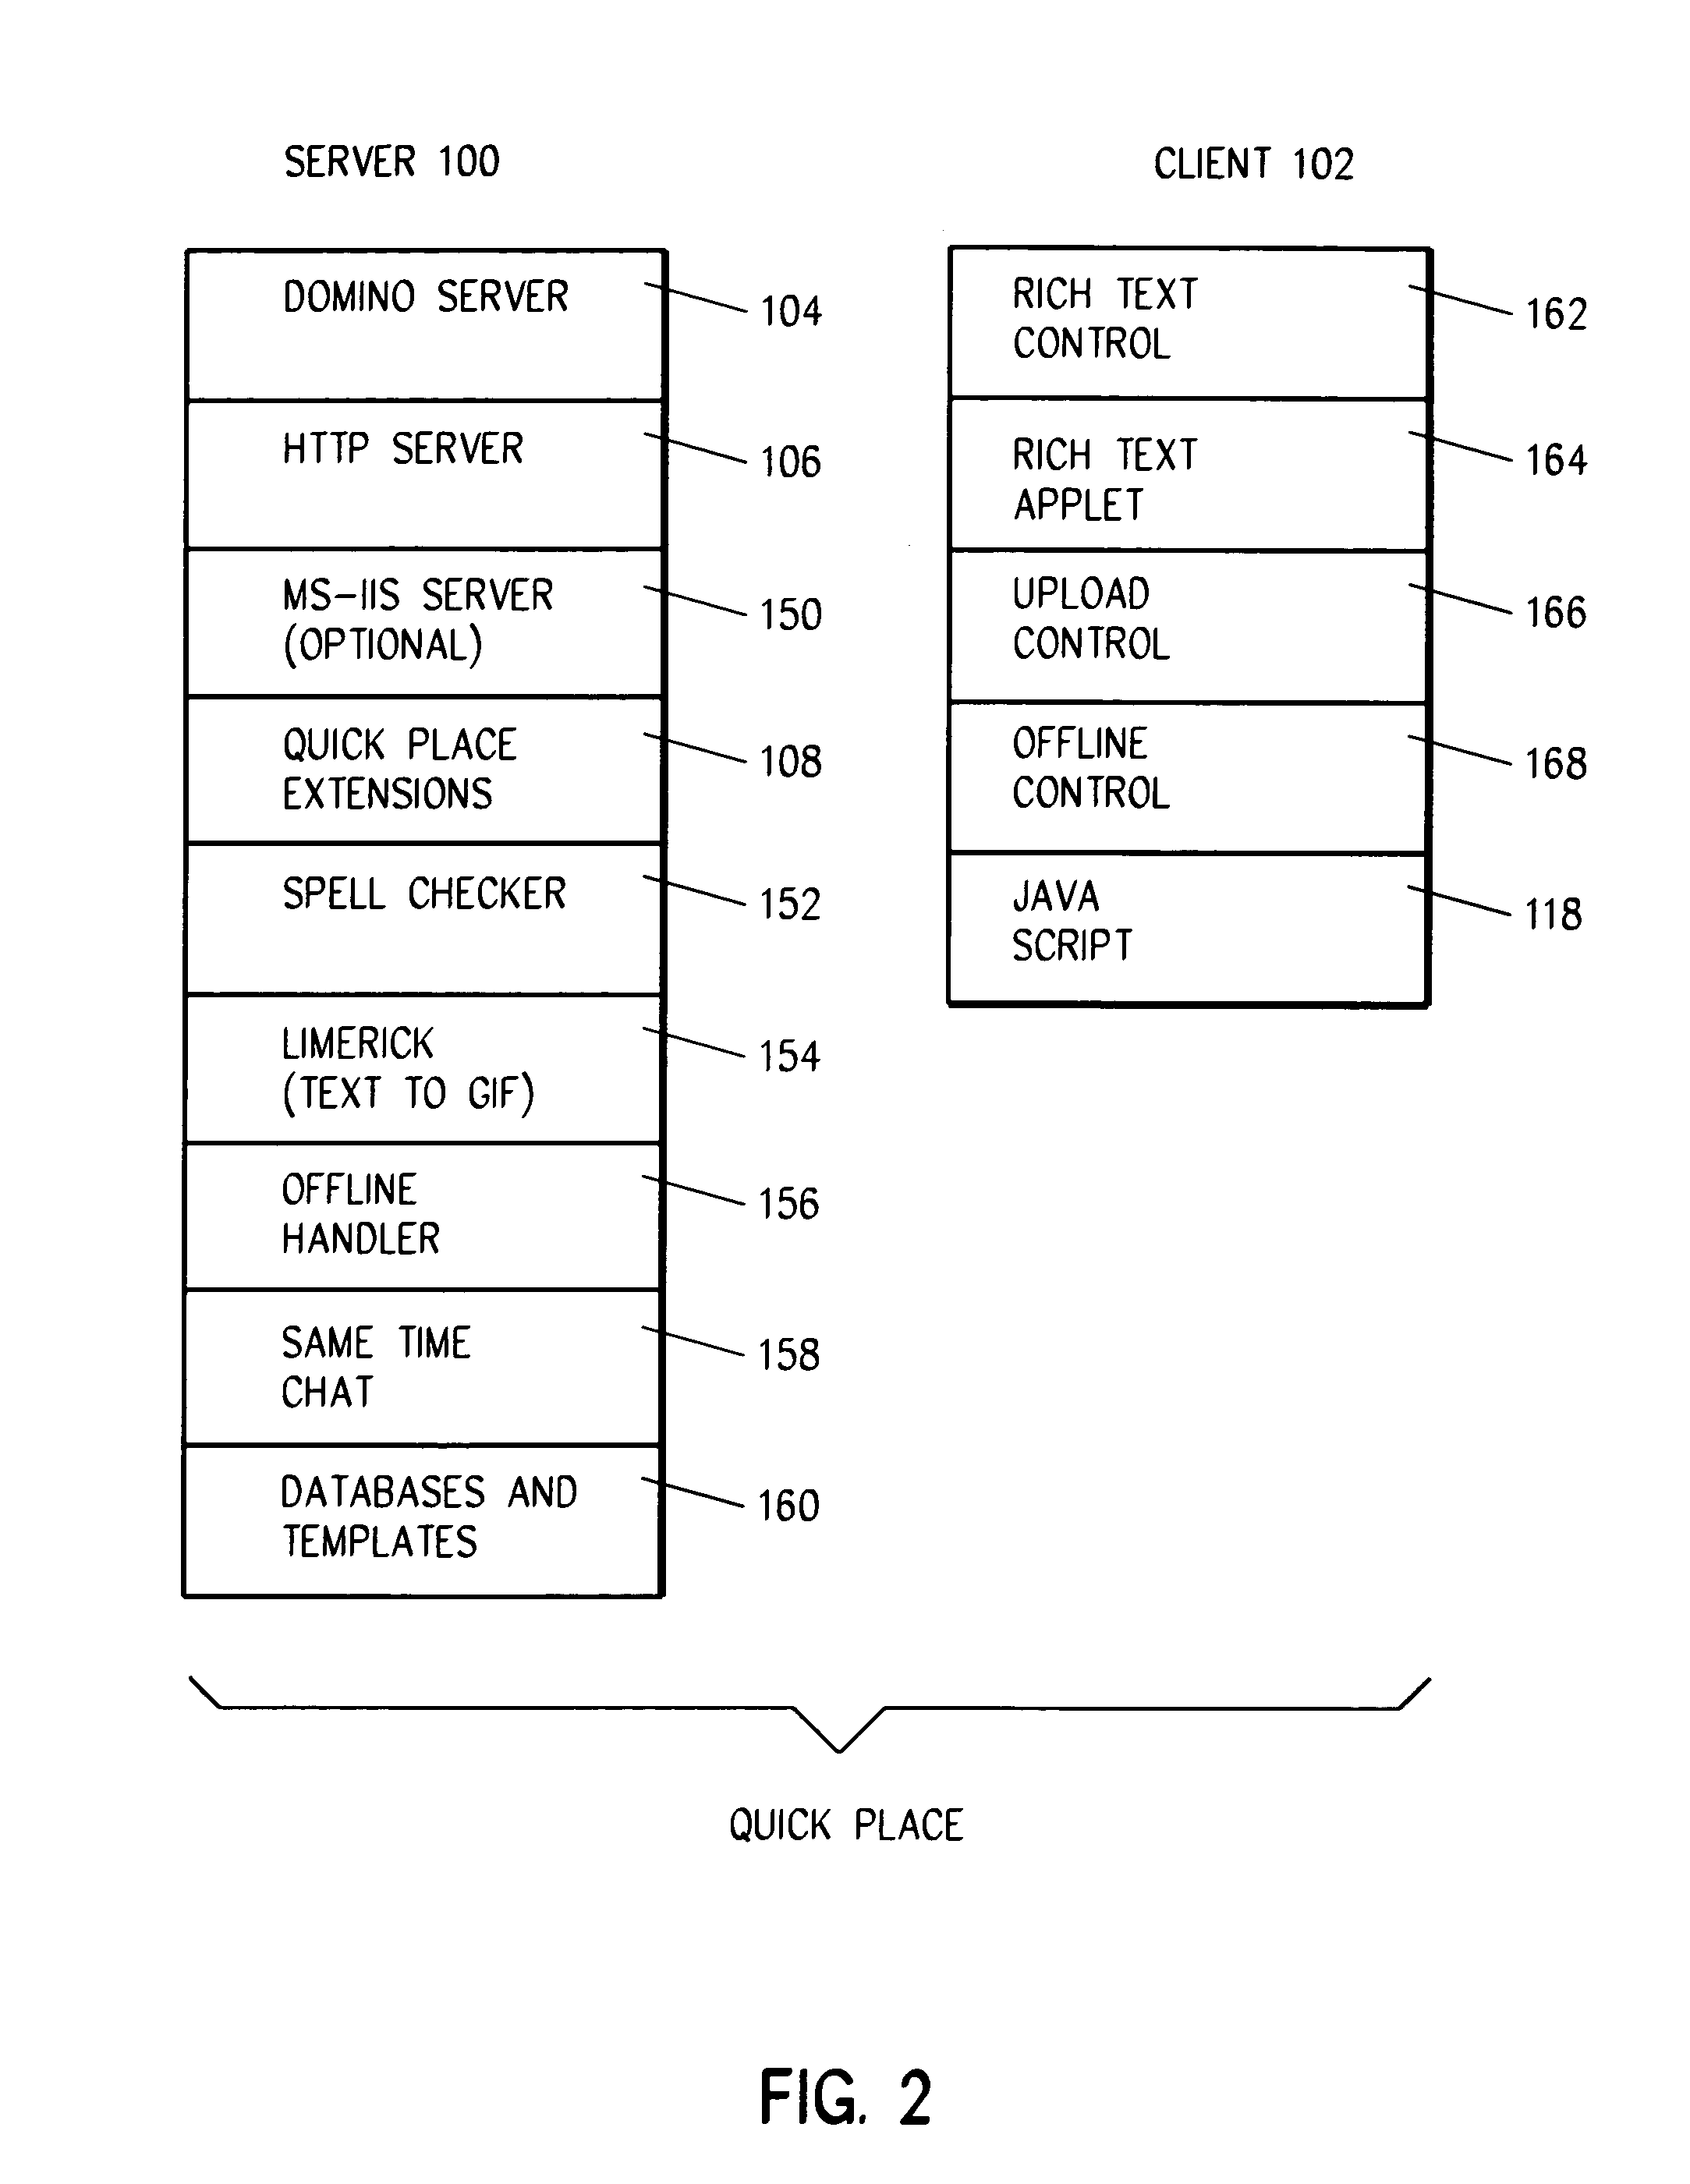 Method and system for creating a place type to be used as a template for other places